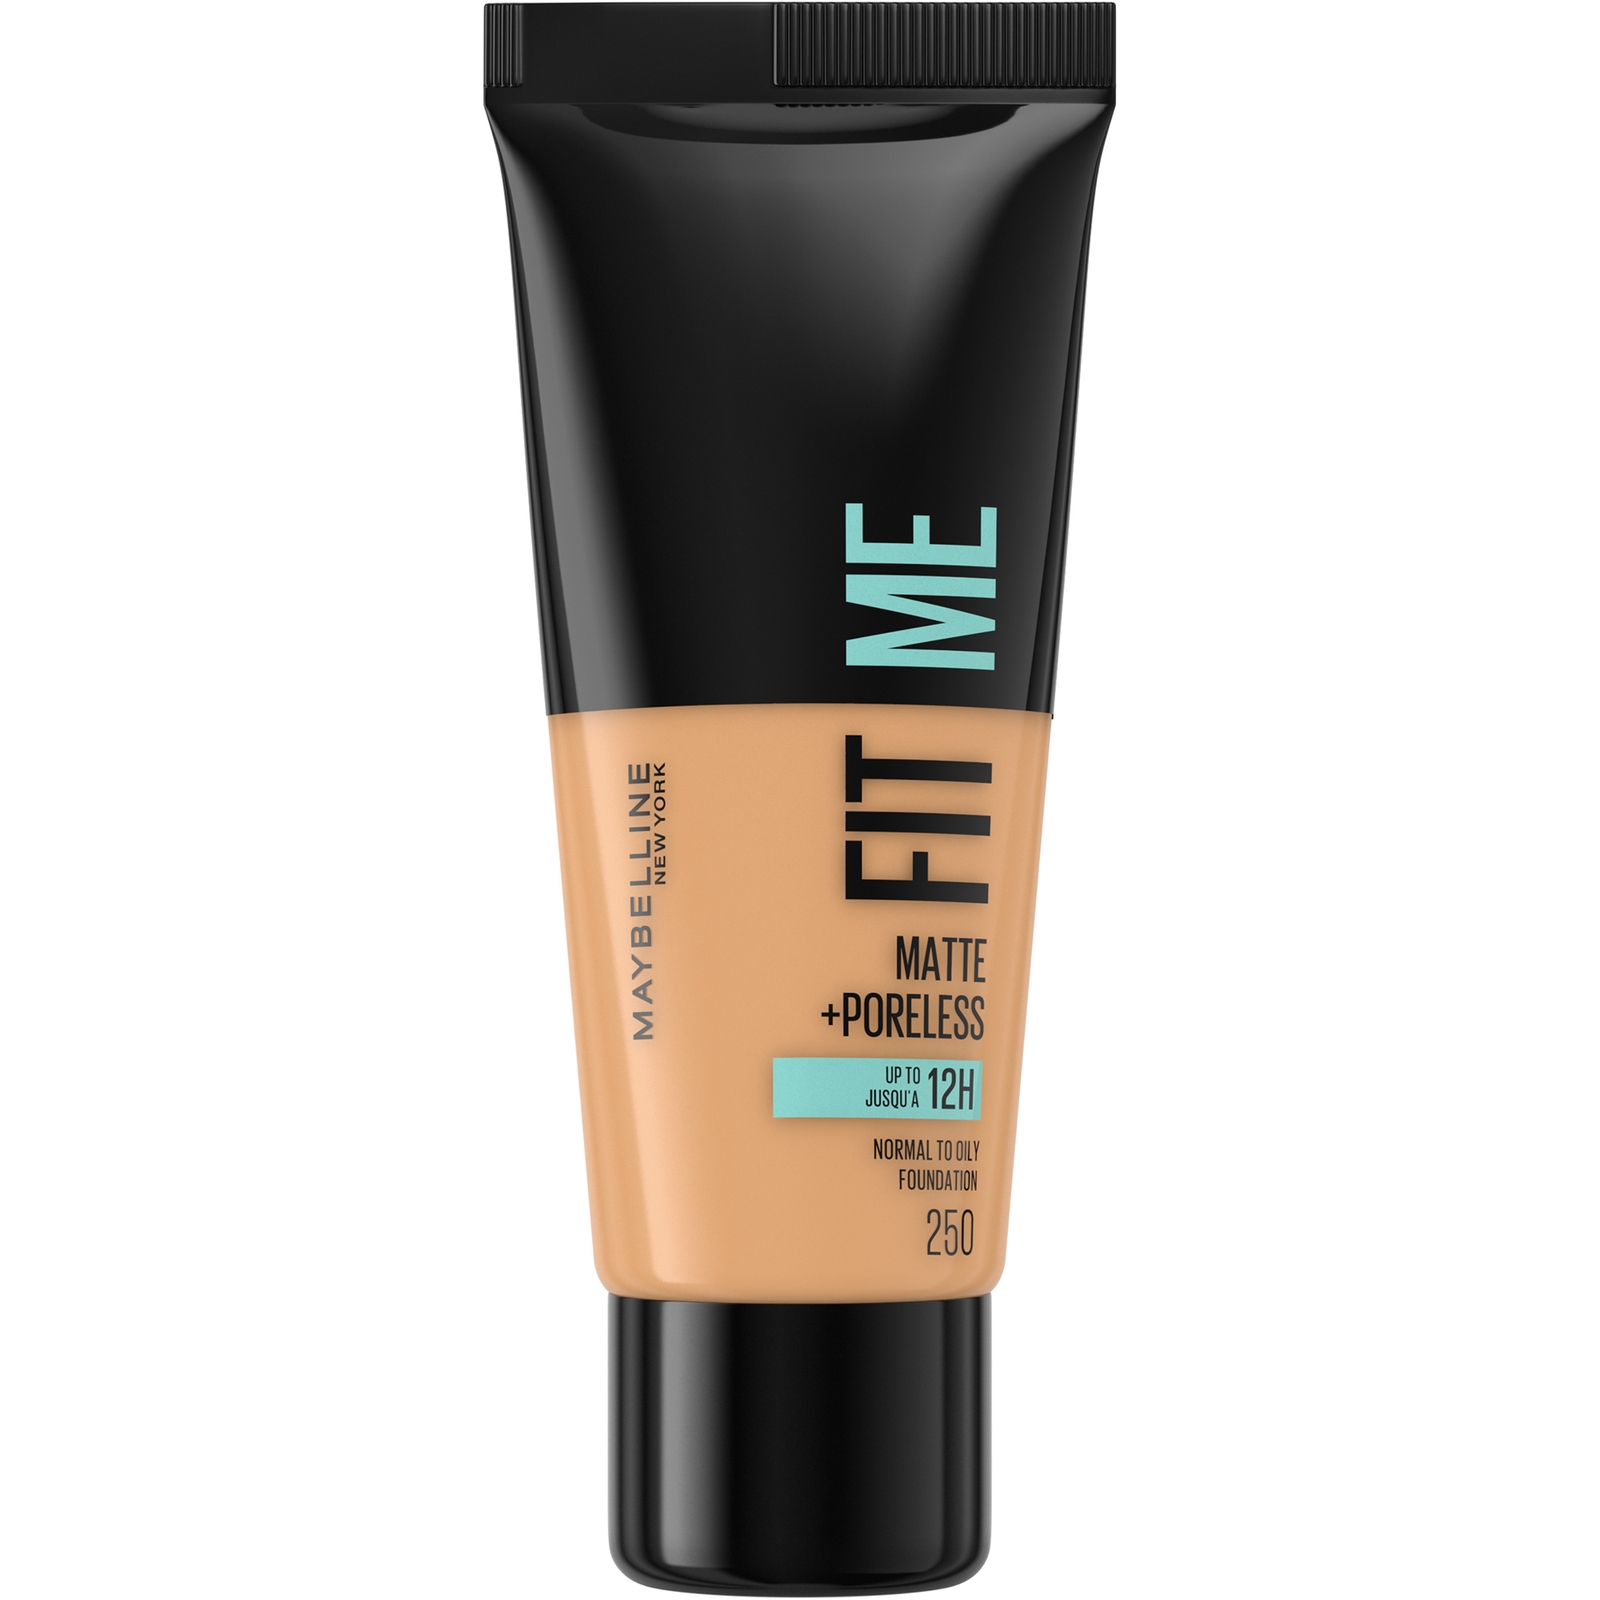 Maybelline Fit Me! Matte and Poreless Foundation 30ml (Various Shades) - 250 Sun Beige